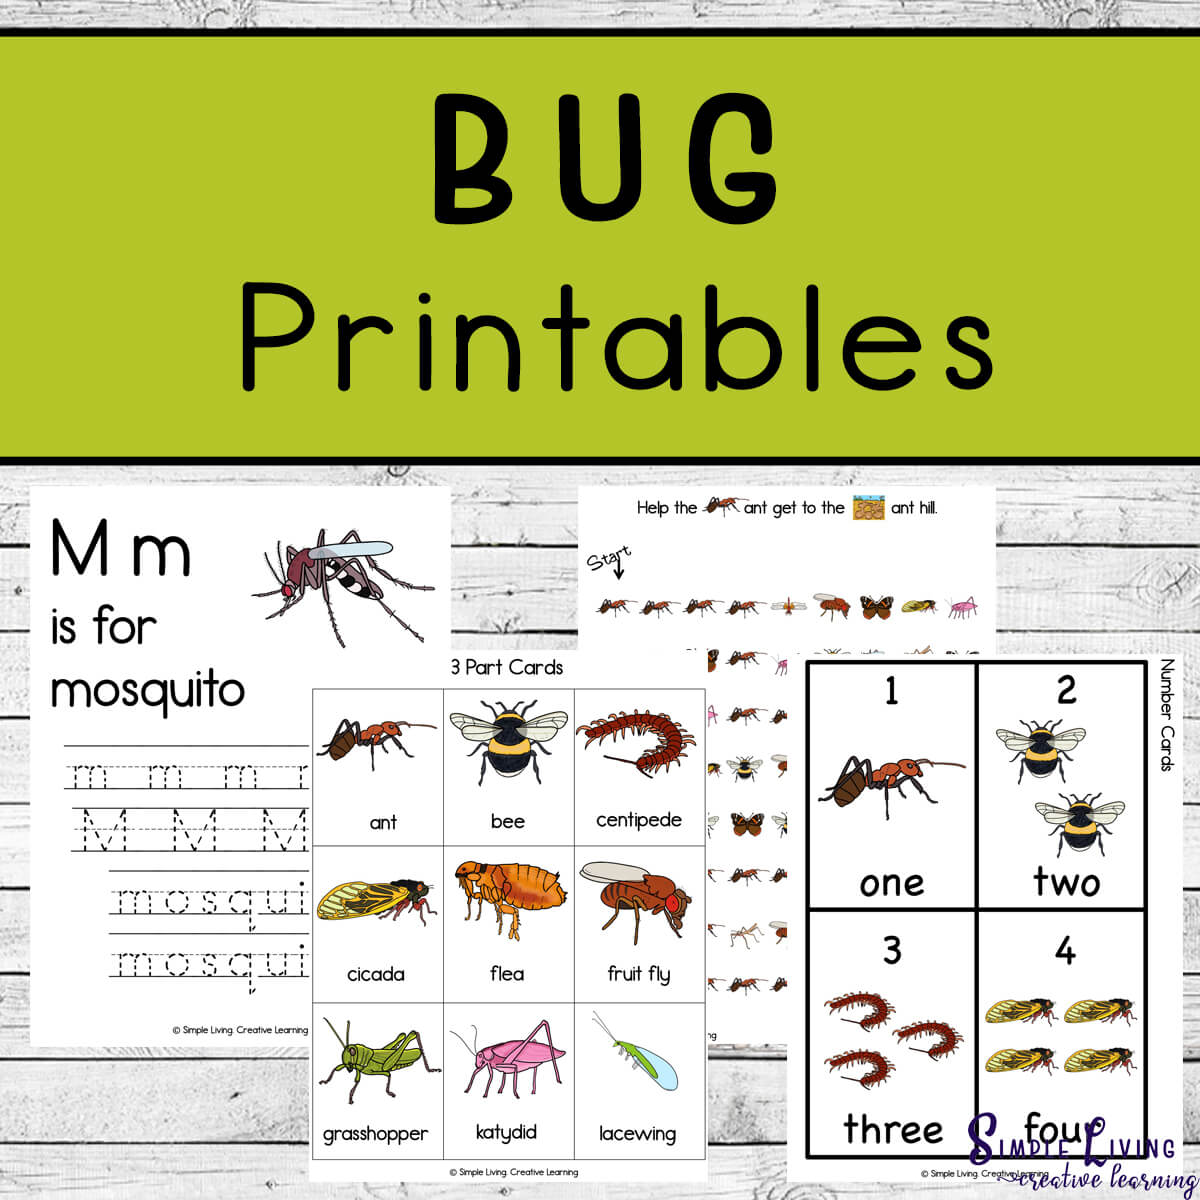 Bug Printables four pages